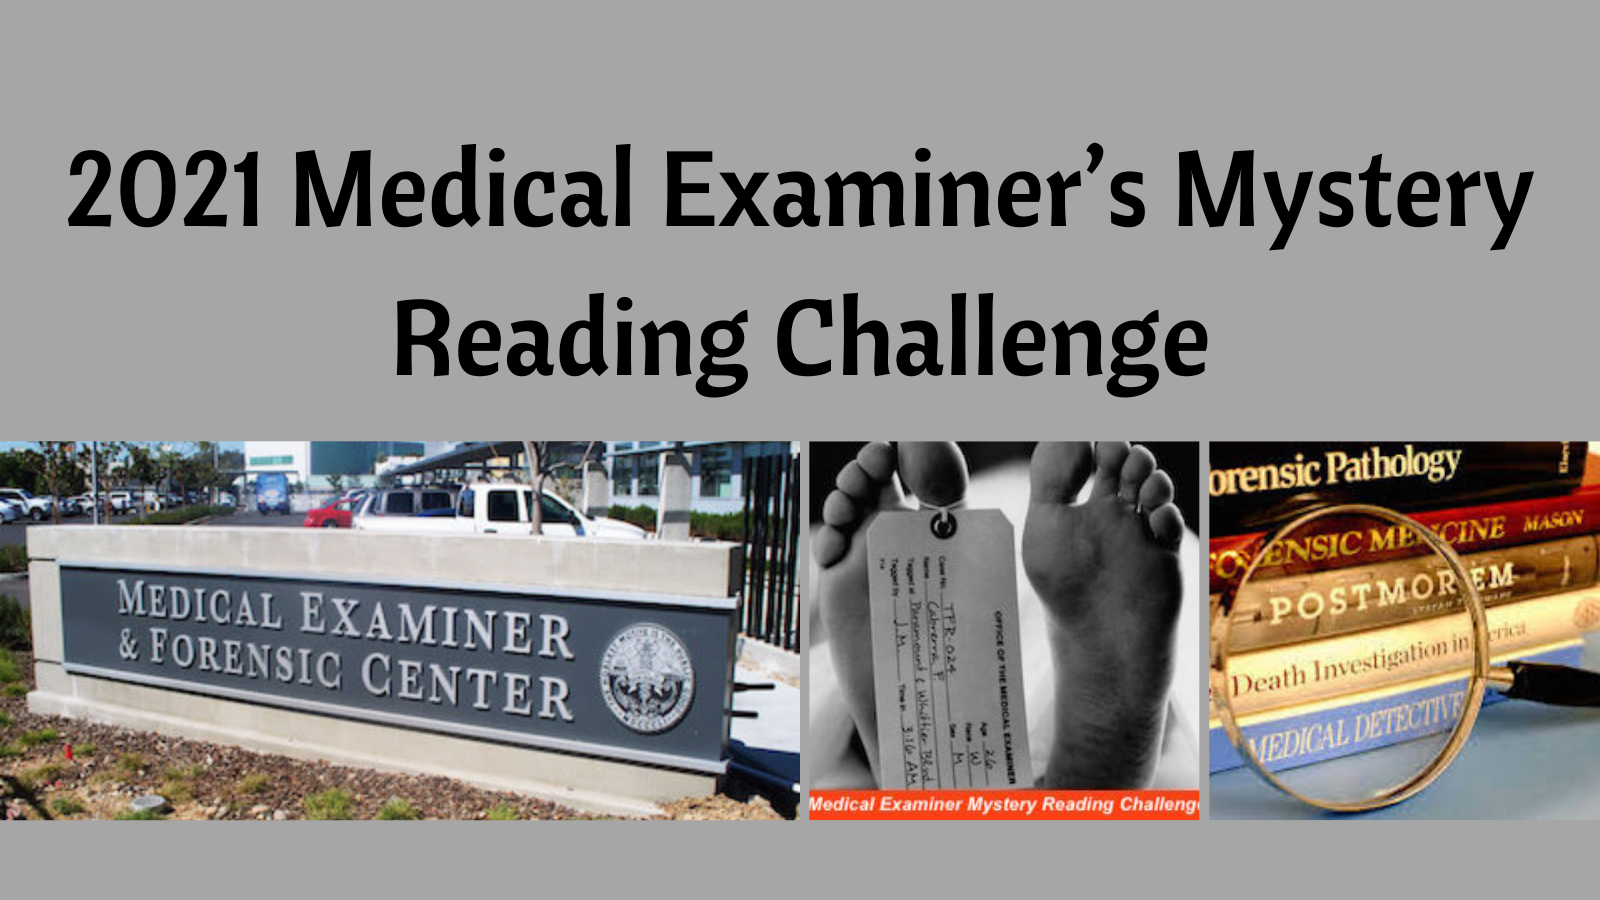 2021 Medical Examiner’s Mystery Reading Challenge